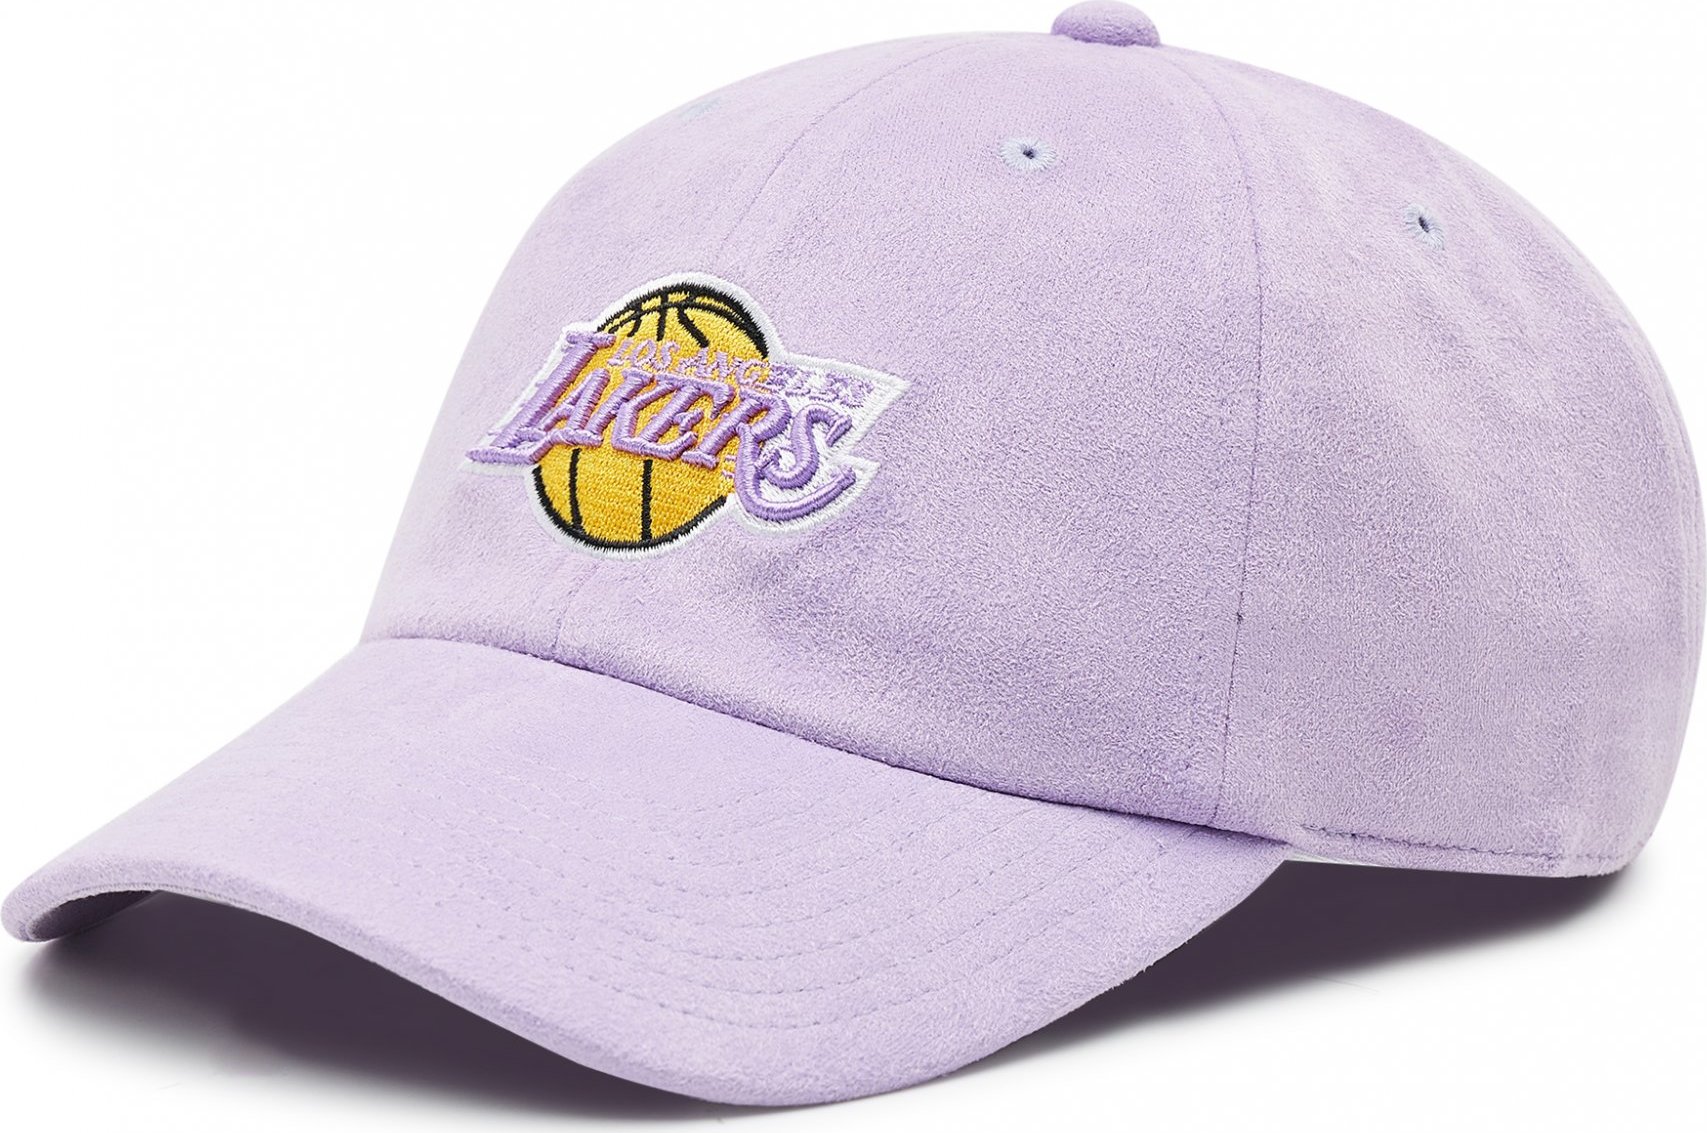 Mitchell & Ness HLUO3000